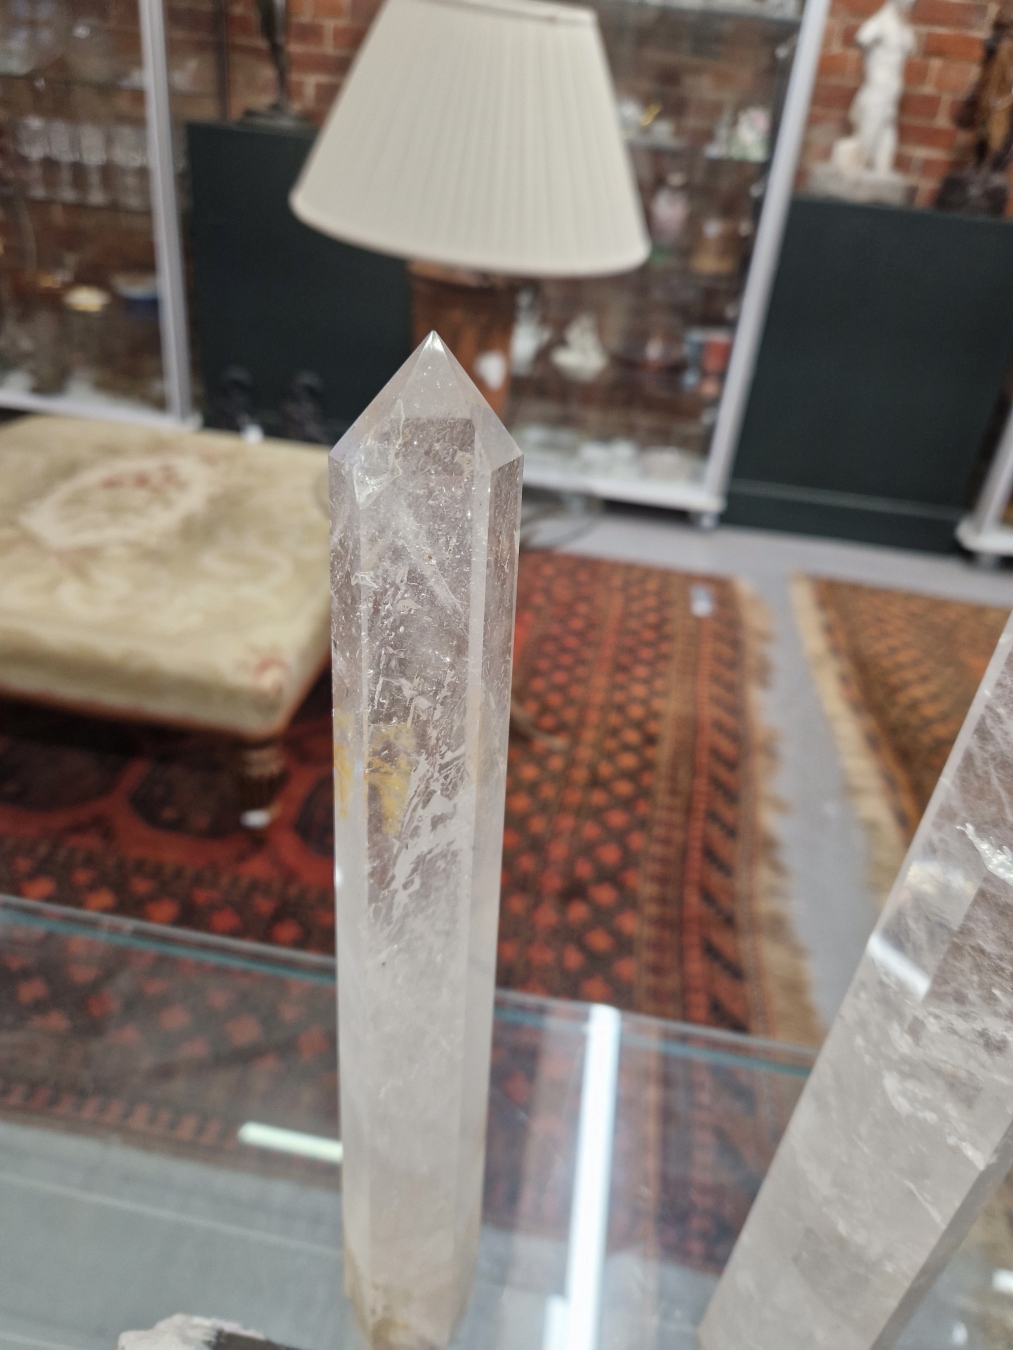 A PAIR OF CUT ROCK CRYSTAL OBELISK TOGETHER WITH A NATURAL CRYSTAL FORMATION - Image 3 of 8